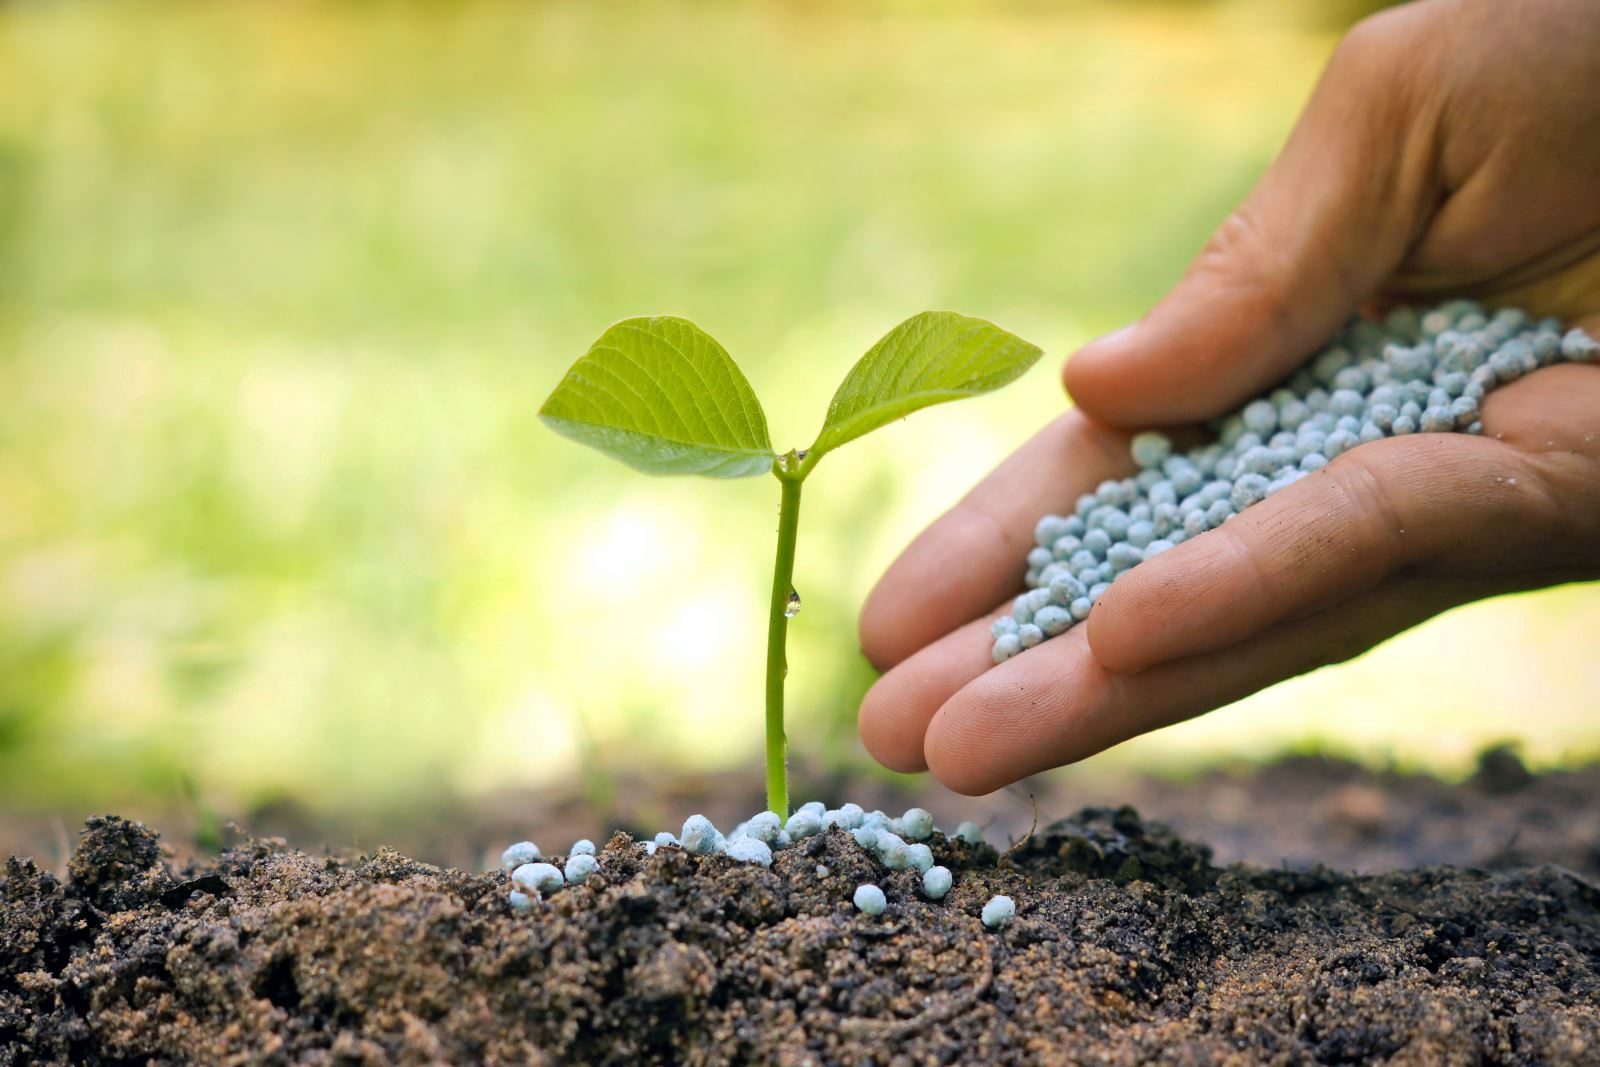 Global Organic Fertilizer Market Is Estimated To Witness High Growth Owing To Increasing Demand For Environment-friendly Farming Practices